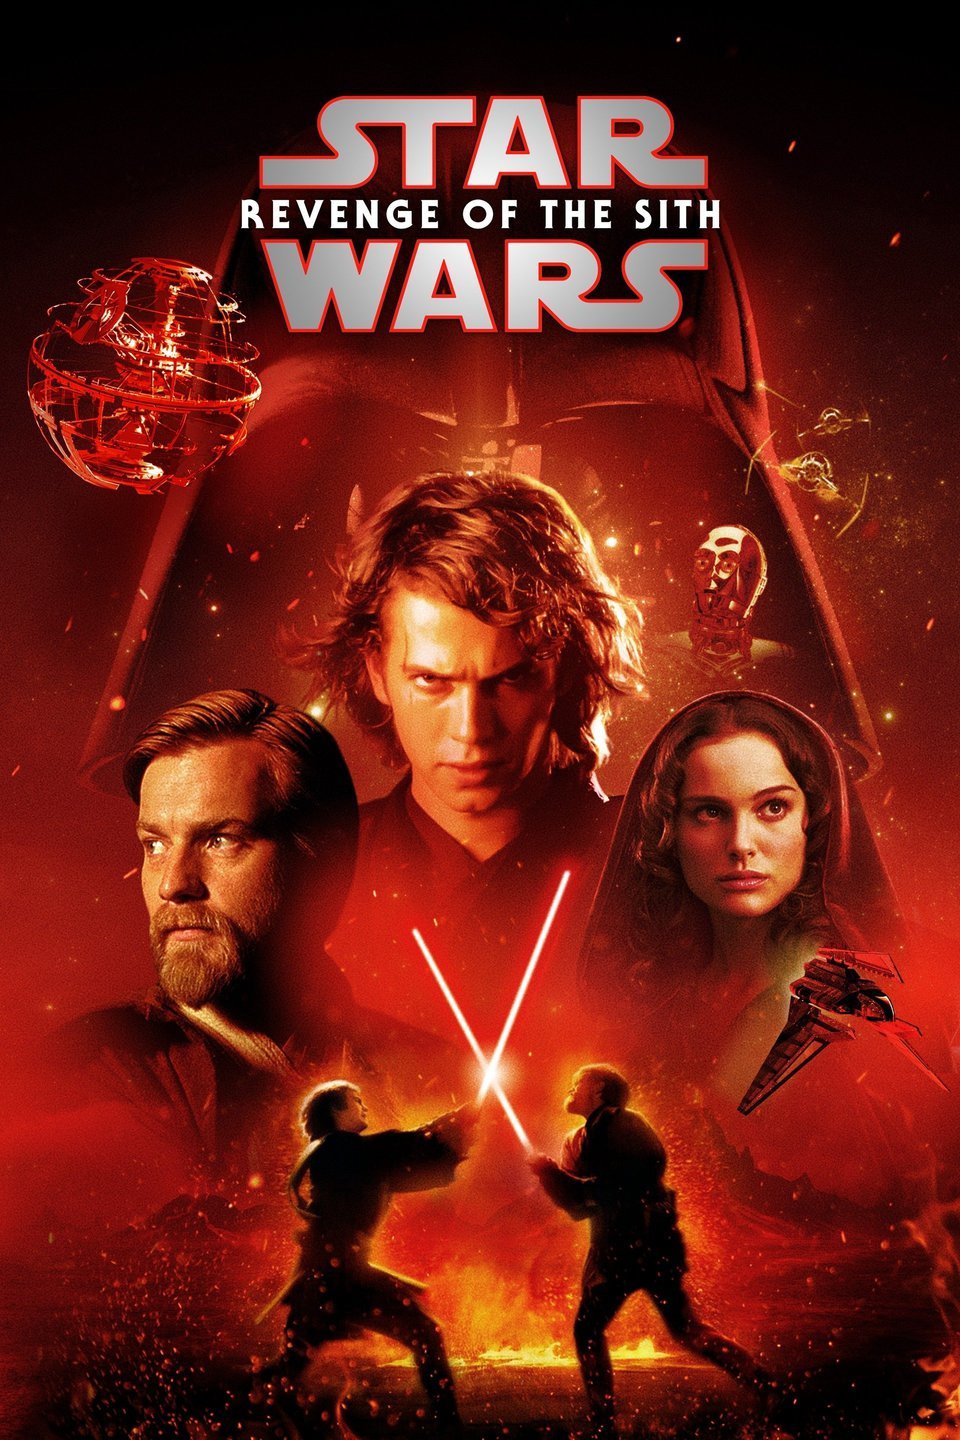 star-wars-episode-iii-revenge-of-the-sith-movie-reviews